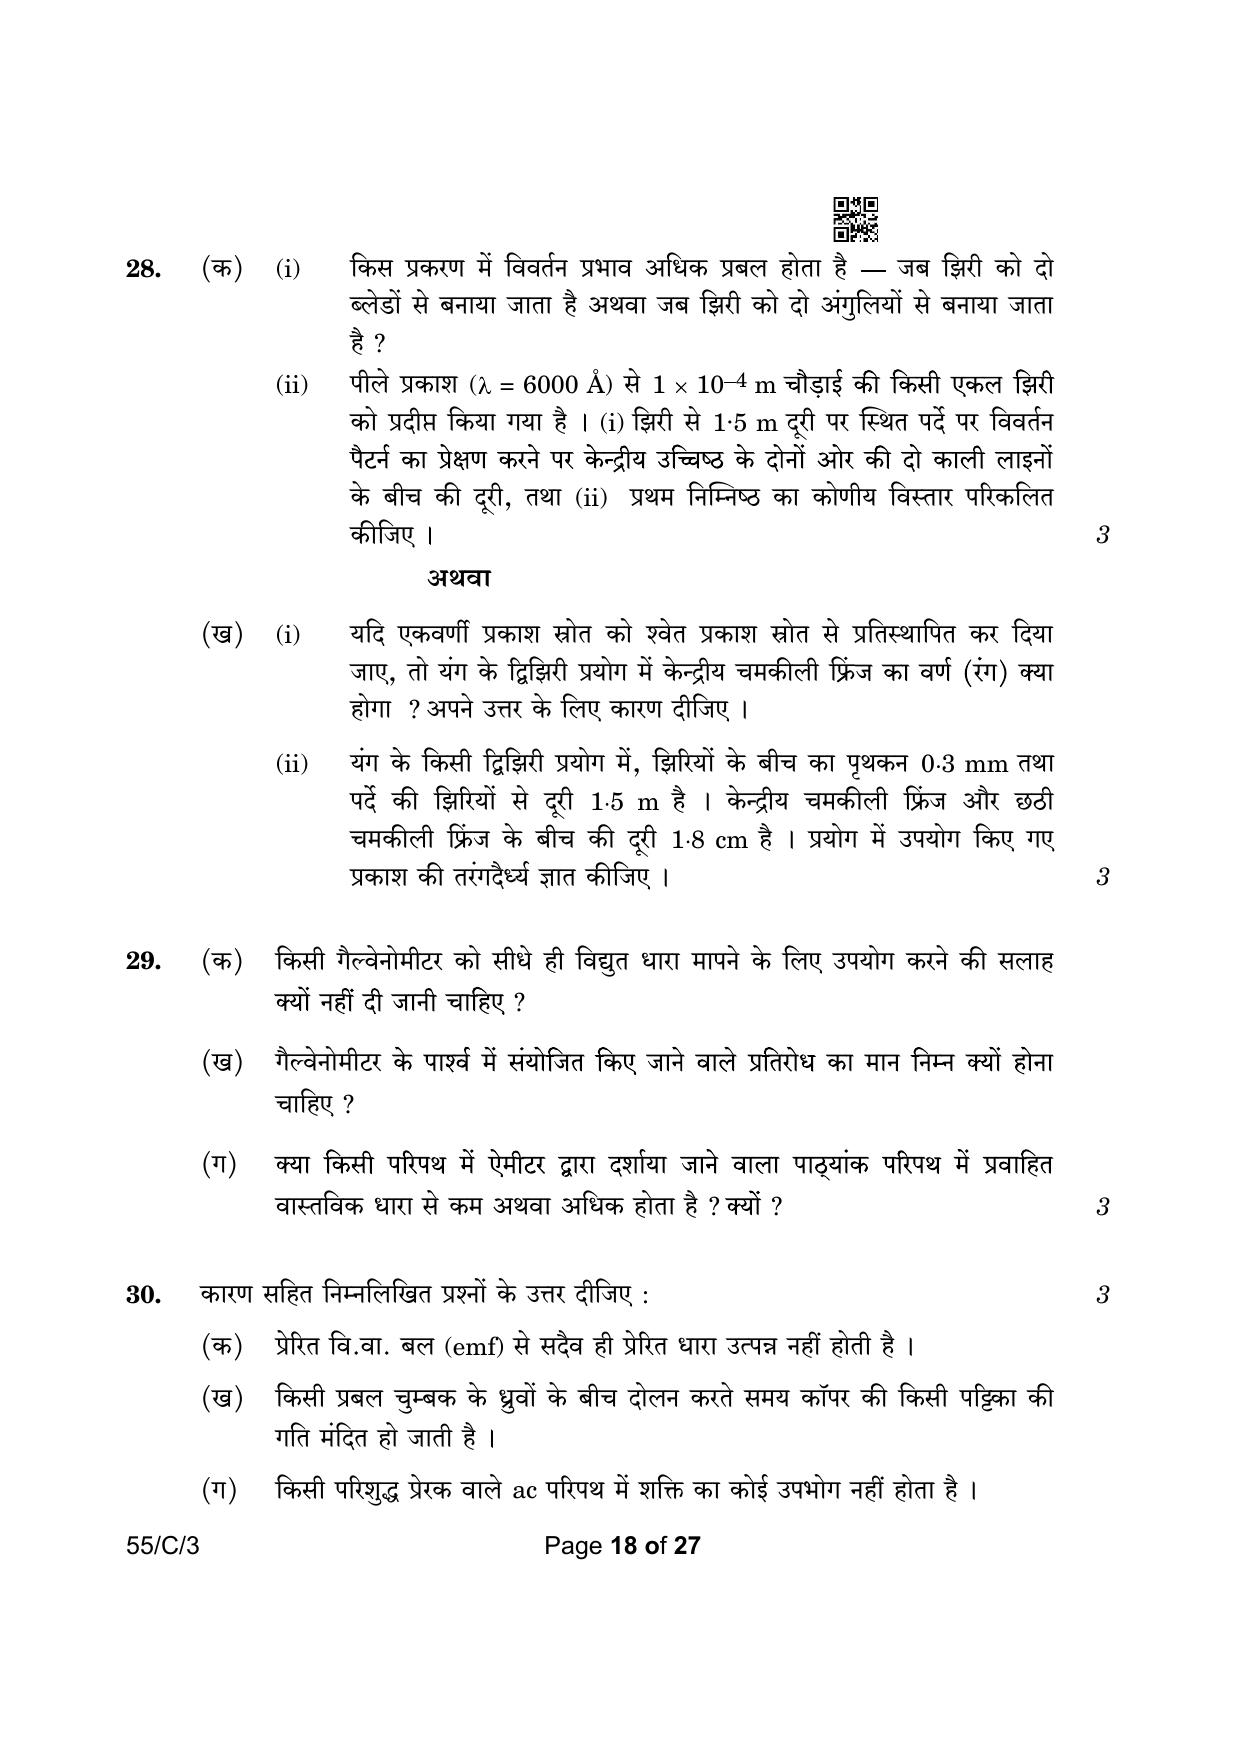 CBSE Class 12 55-3 Physics 2023 (Compartment) Question Paper - Page 18